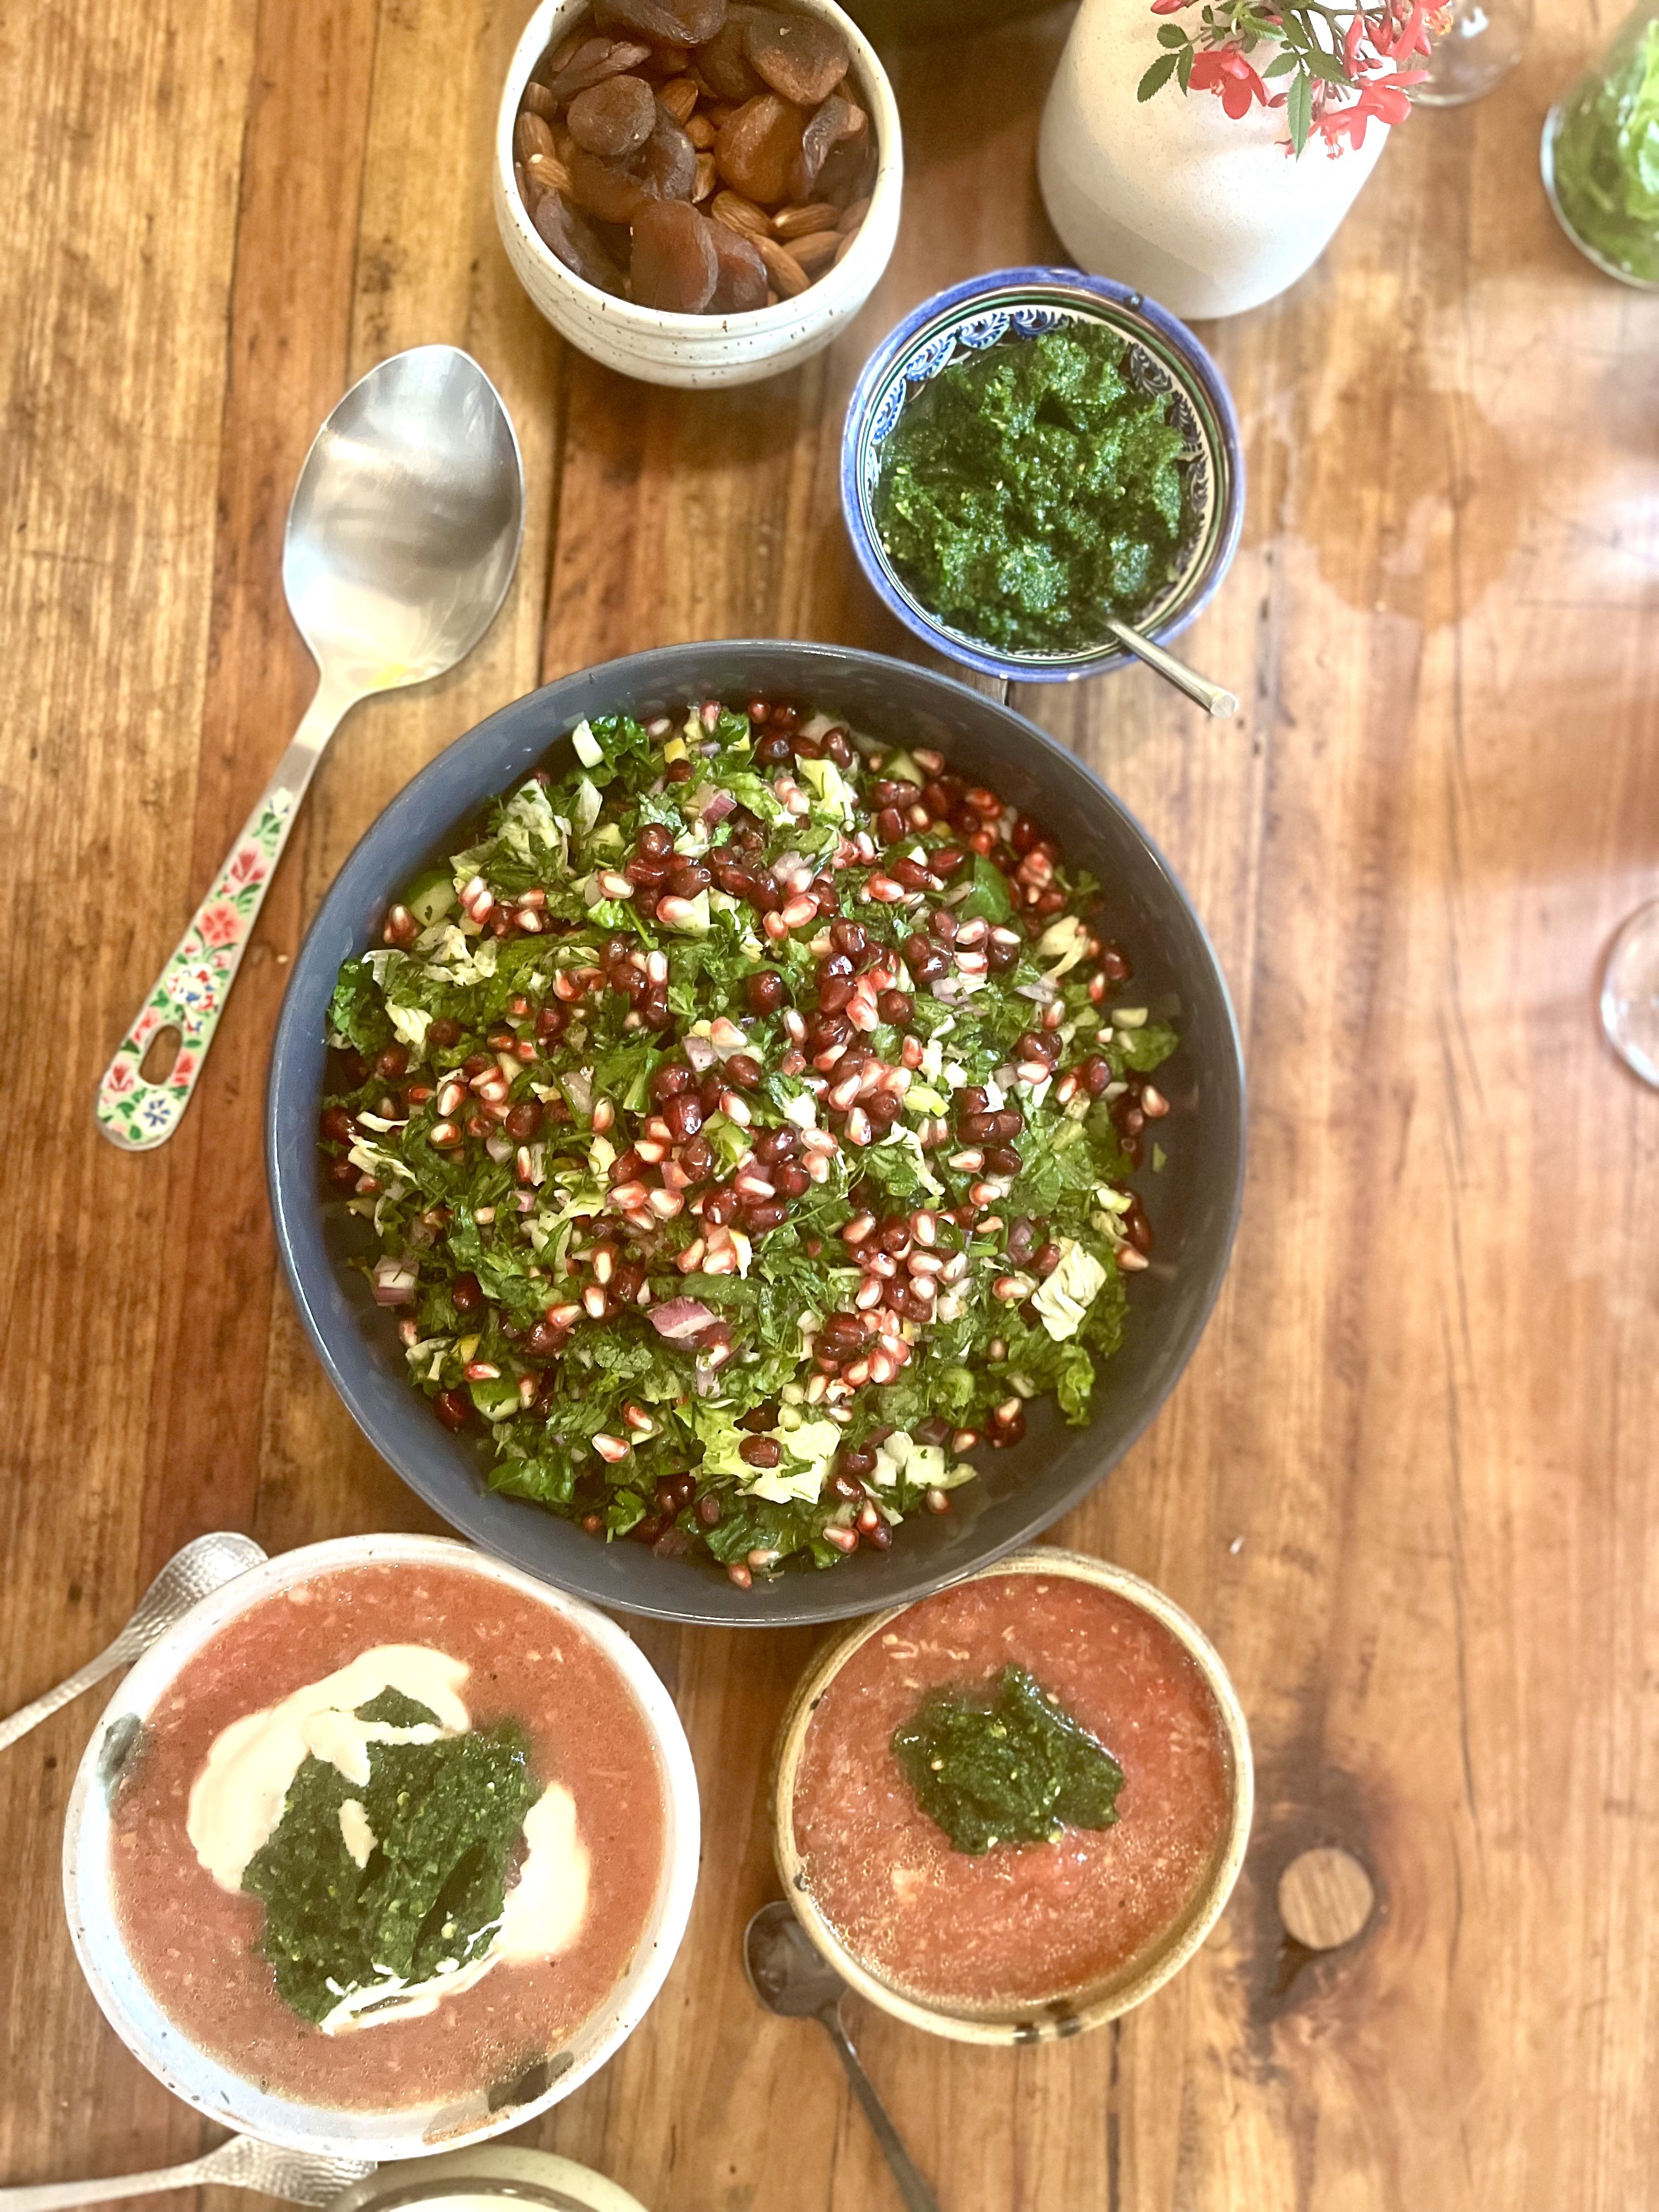 Vegan Mediterranean dishes prepared in a class at Olive Leaf on Lamma Island in Hong Kong. Chef and instructor Ayelet Idan aims to promote the therapeutic benefits of cooking. Photo Kylie Knott